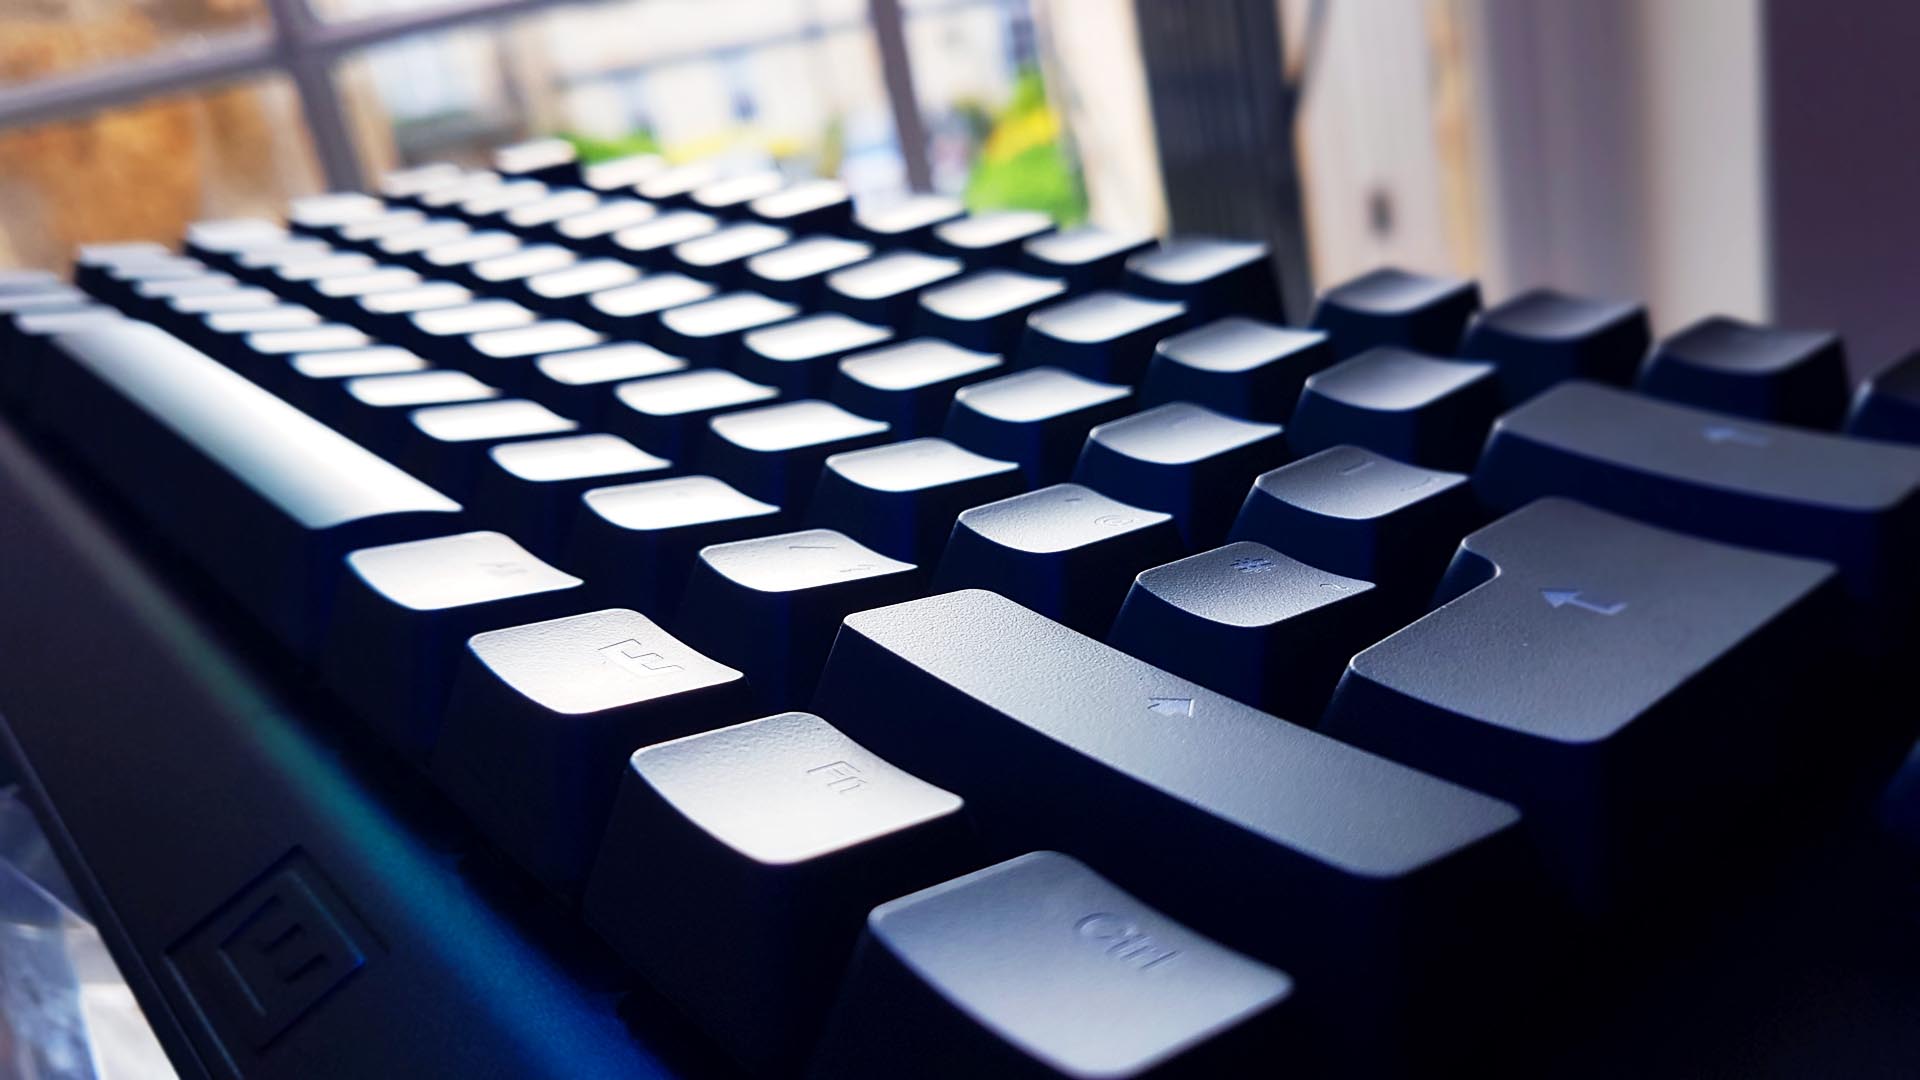 Best Gaming Keyboard The Top Keyboard For Gaming In Pcgamesn